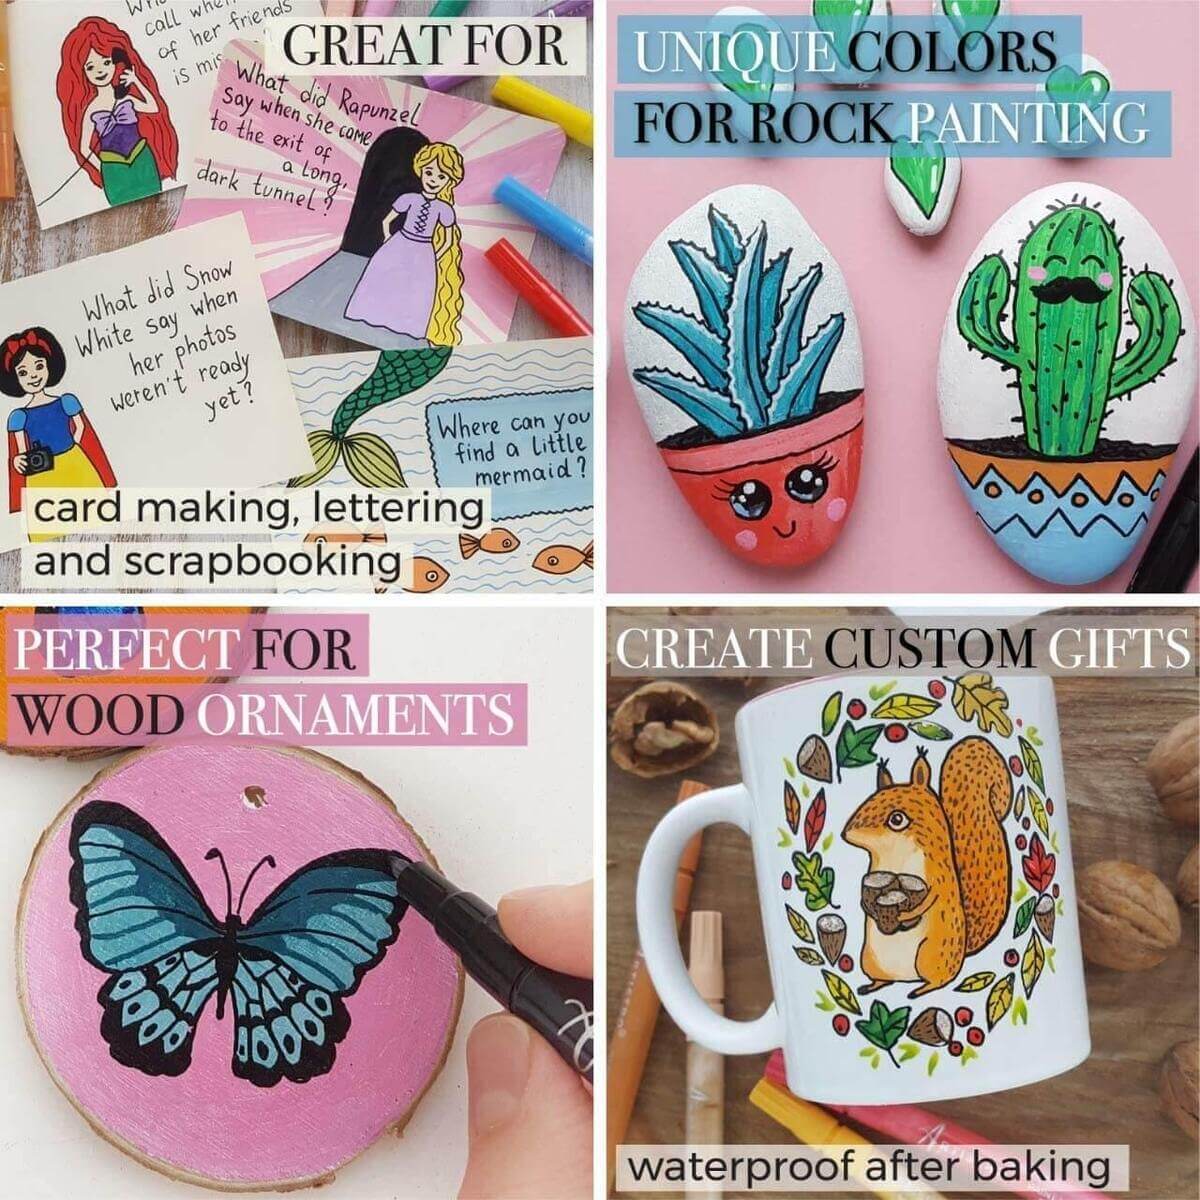 Craft Kits for Kids Artistro 15 Oil Based Cute Paint Pens Fine Tip for Rock  Painting, Family Painting, Wood Art, Glass Art, Artist Gifts 